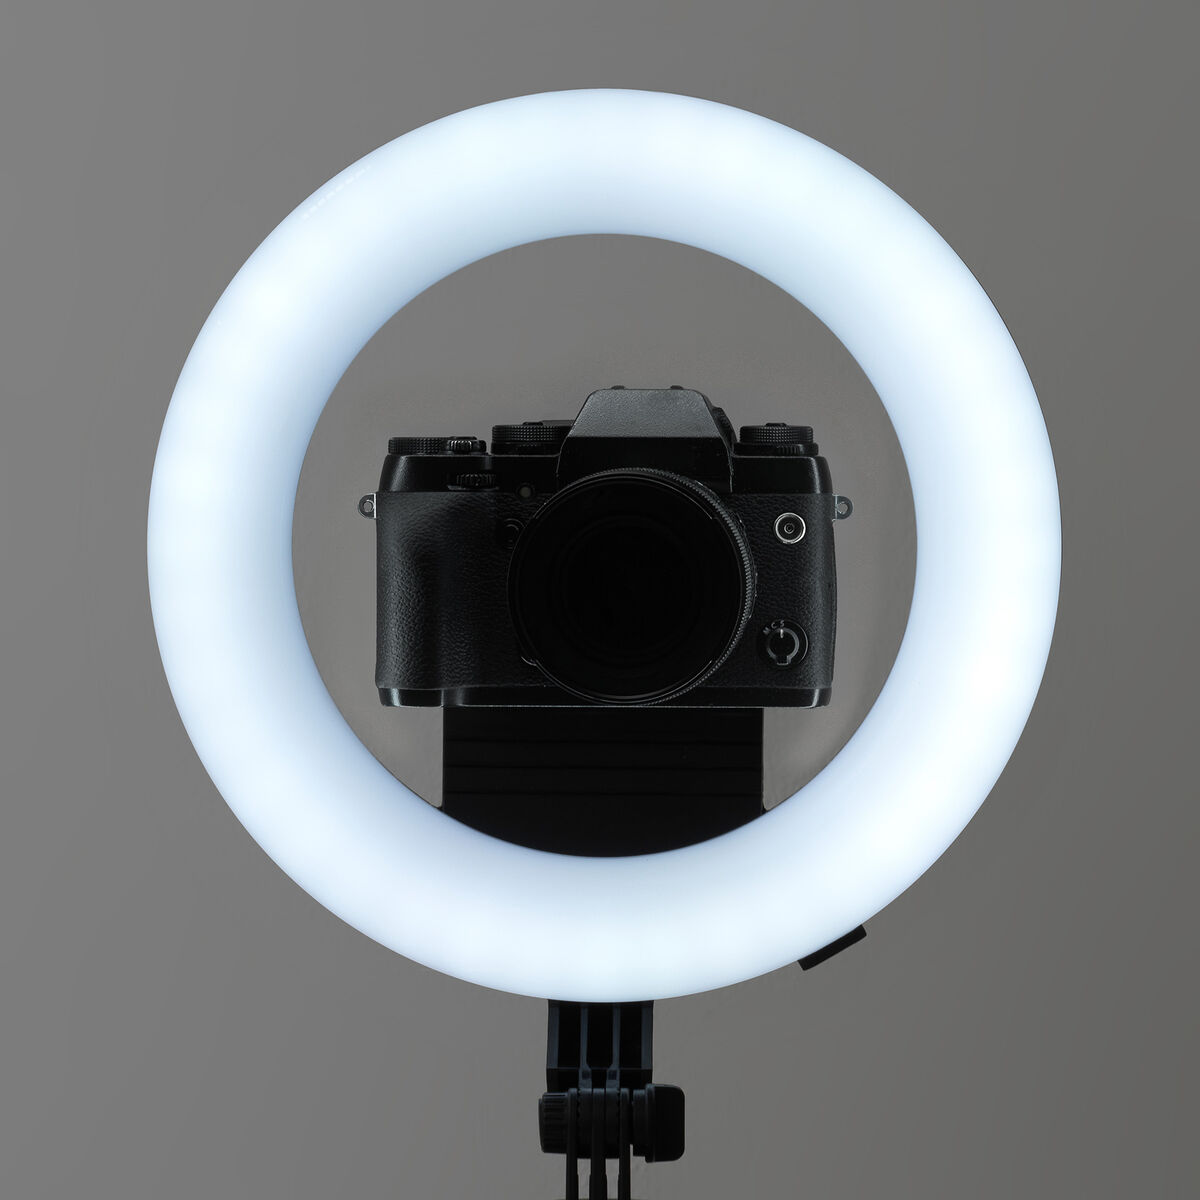 Luce LED ad Anello per Selfie - On Air, , zoo